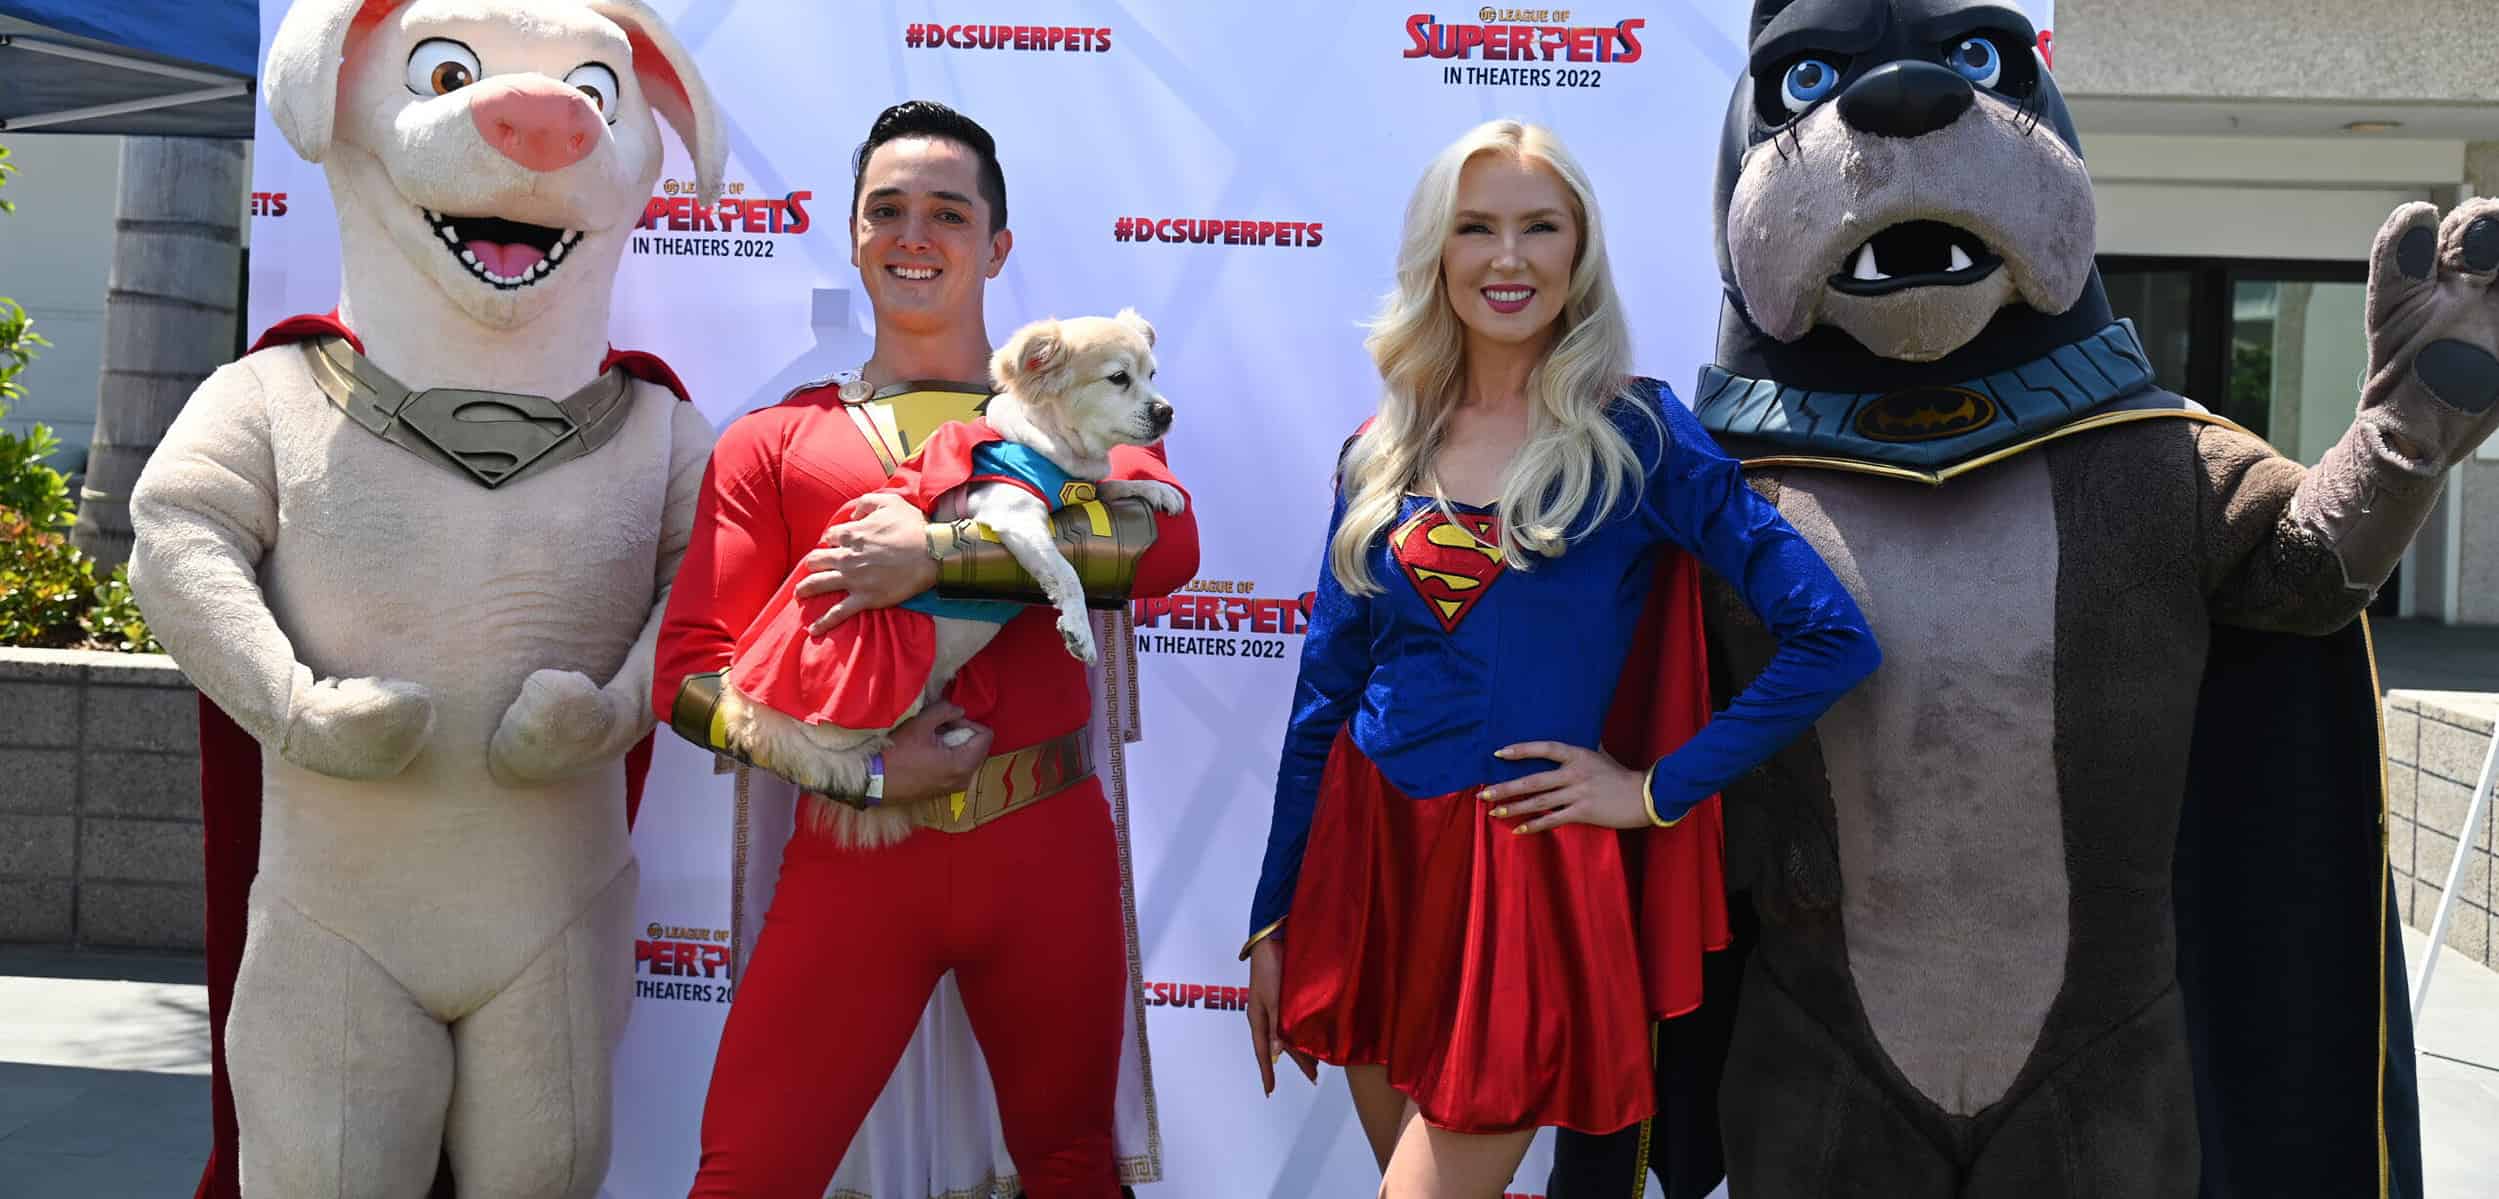 A couple and dogs in superhero costumes pose with two people wearing dog mascot costumes.